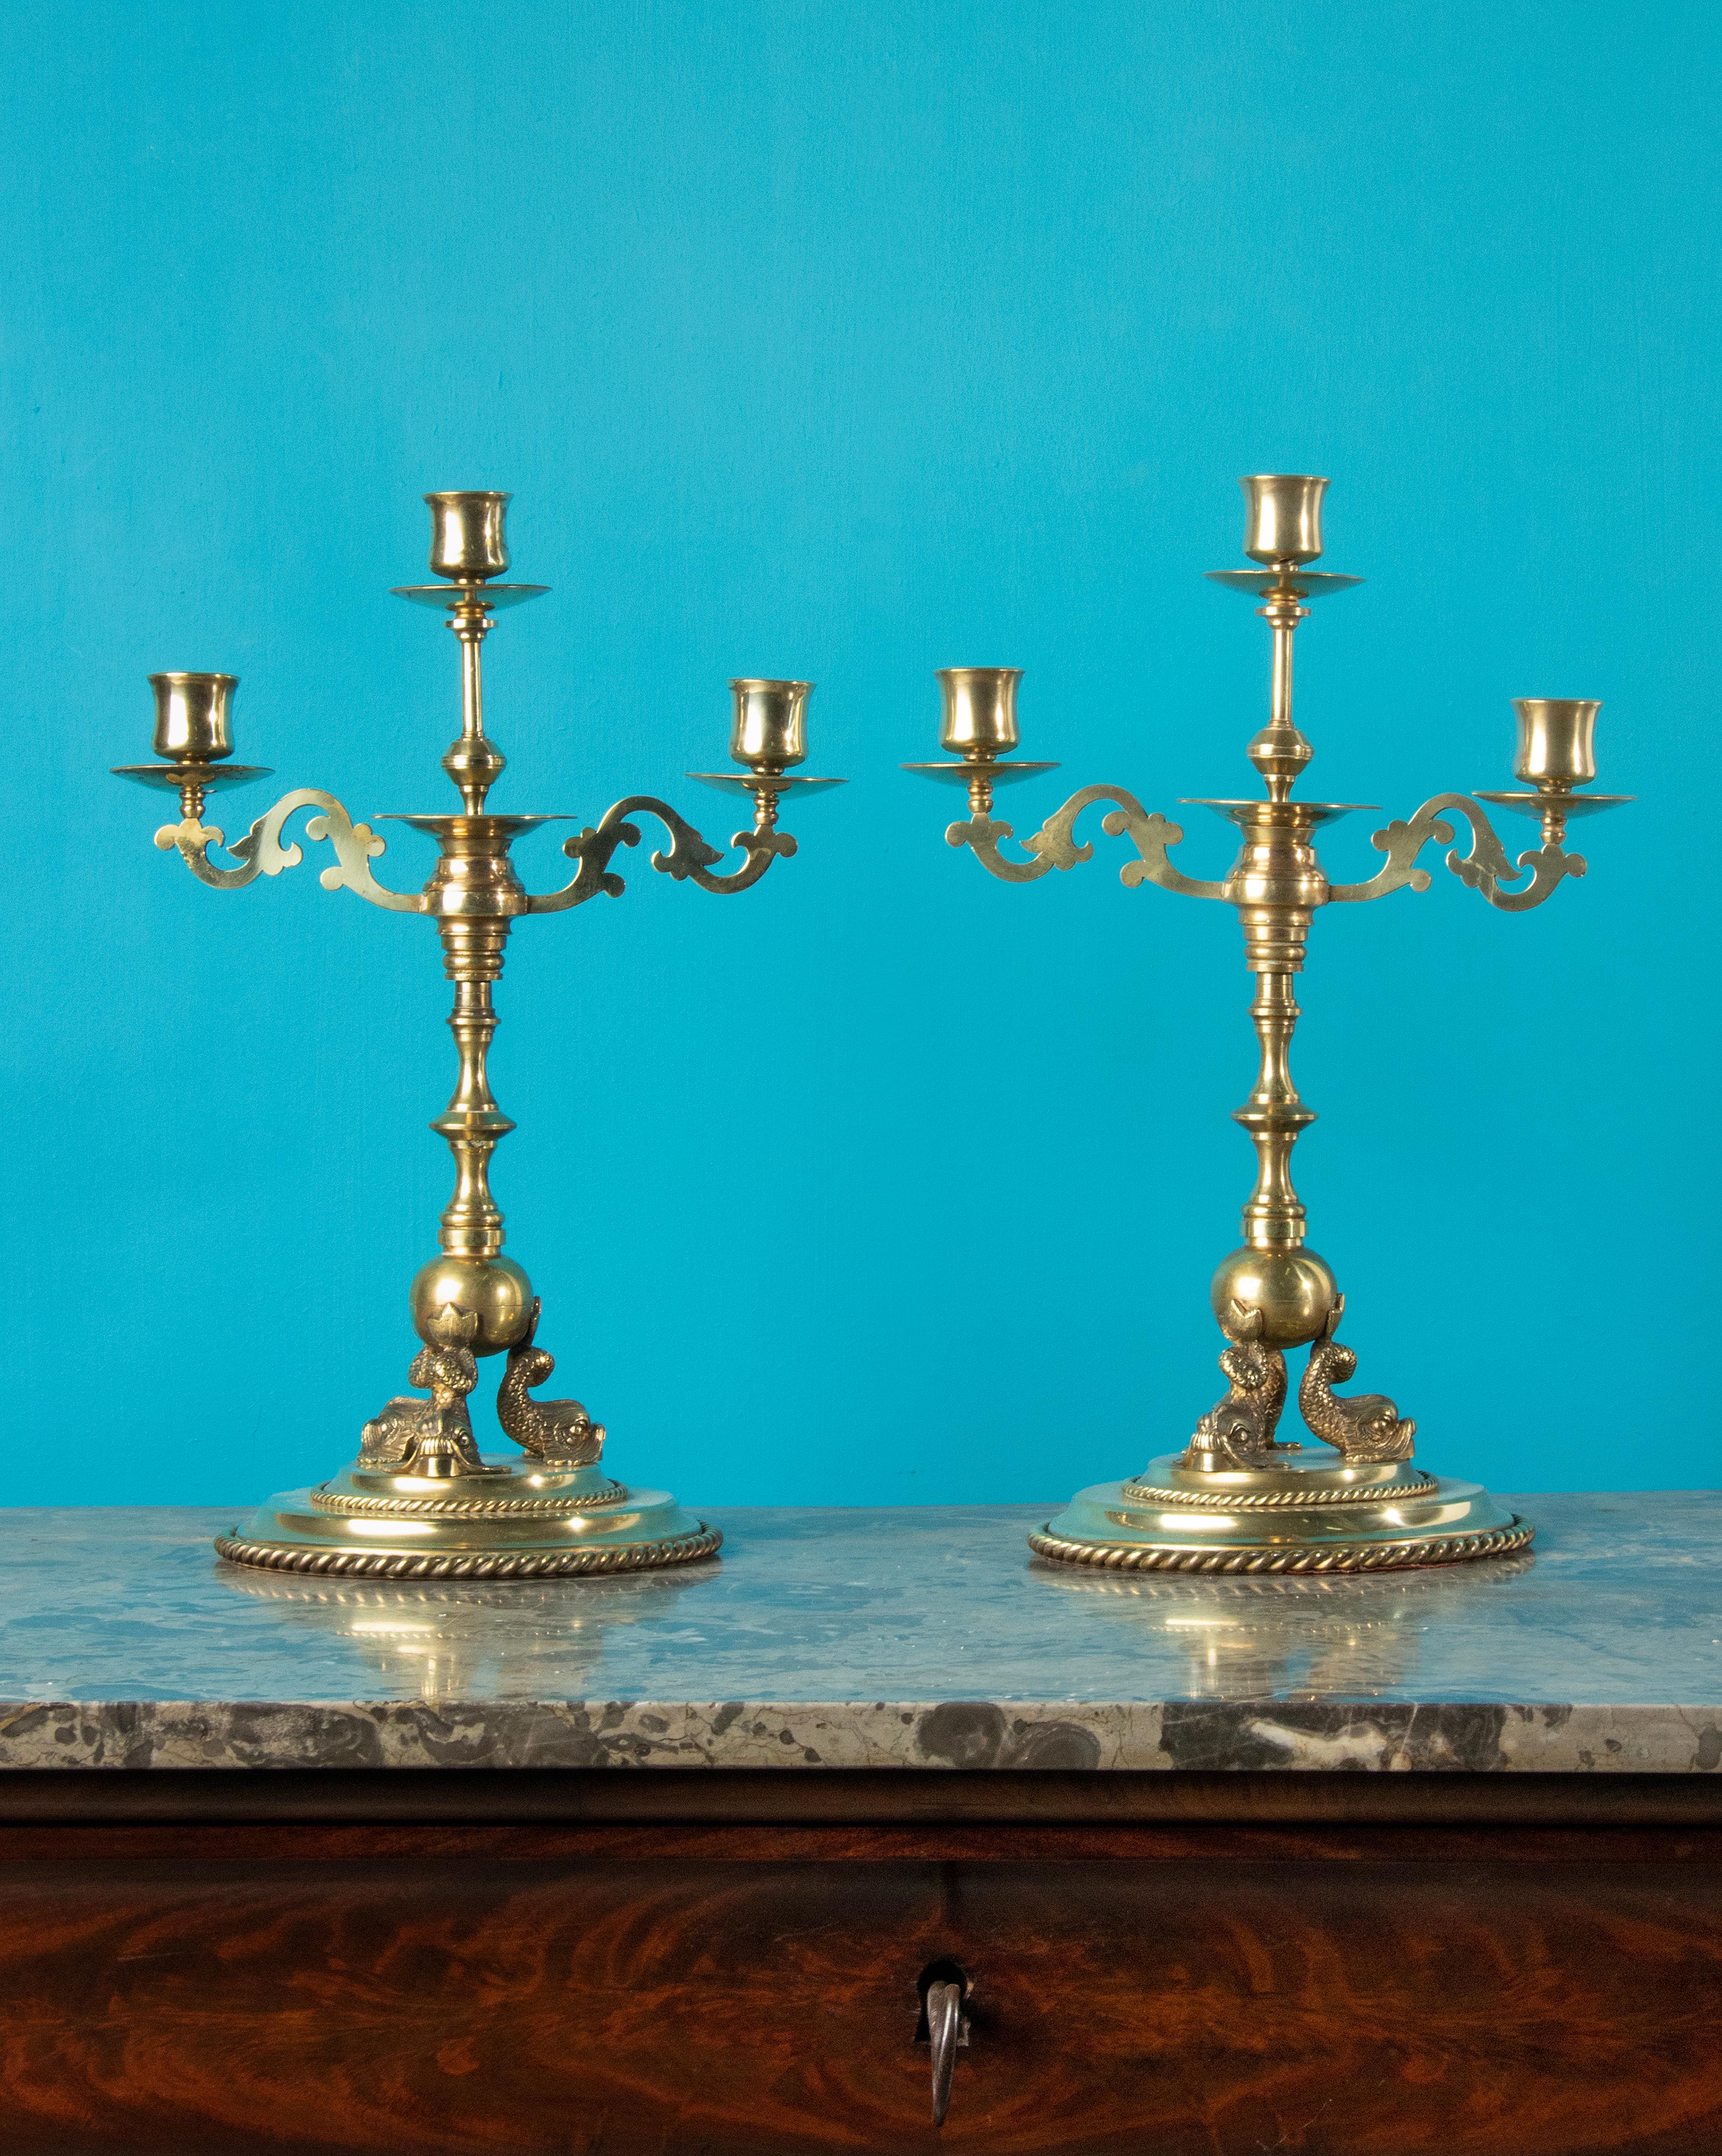 A nice pair of antique candelabras, made of brass. The candelabras have ornate ornaments and dolphins at the base. They date from about 1890. The bottom is covered with red felt. Both are in good condition and have a beautiful color/gloss.